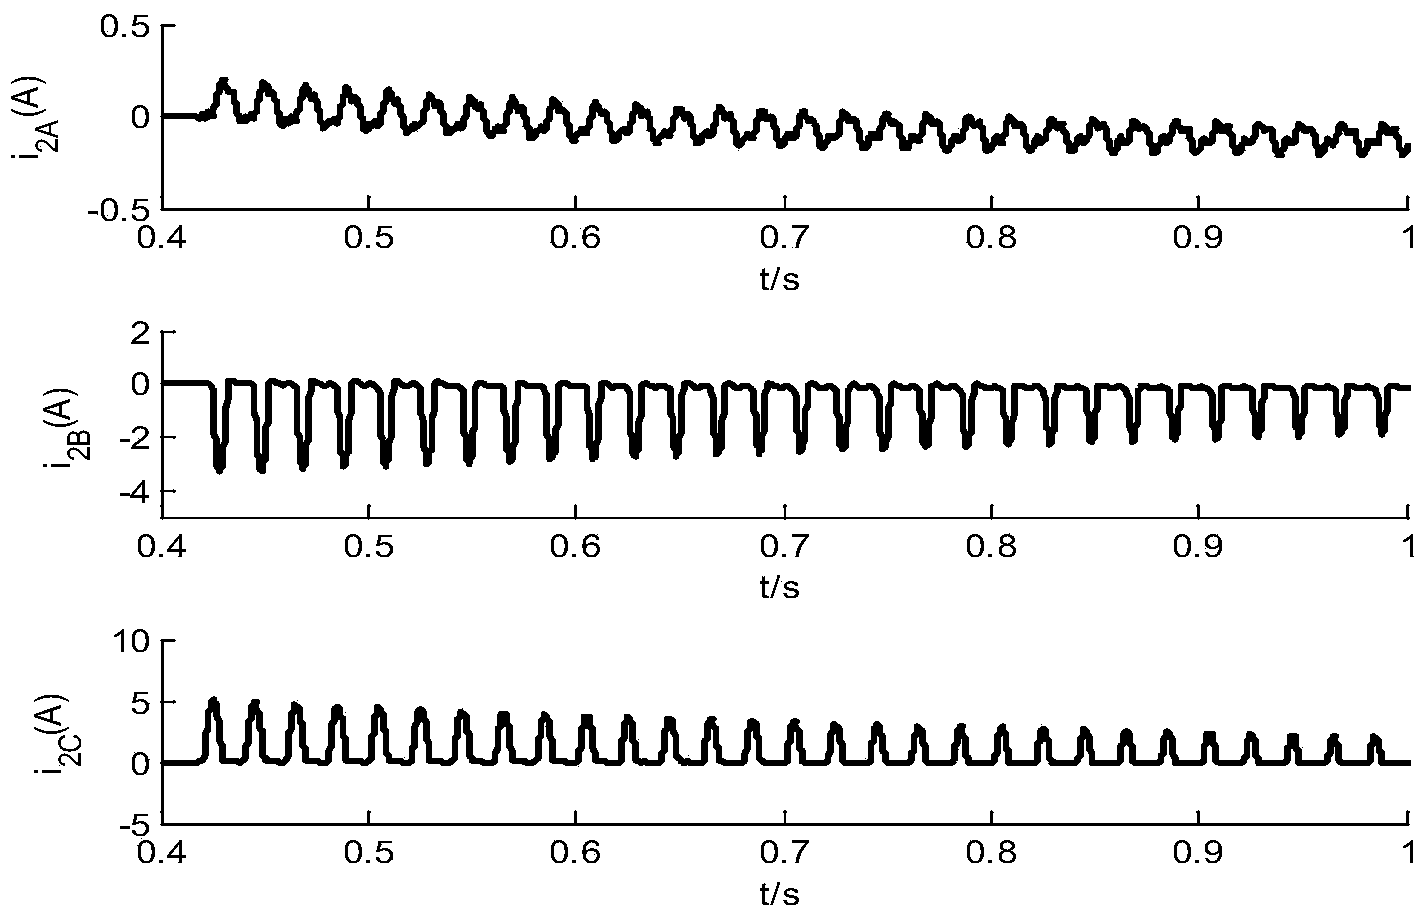 Large difference protection method based on second harmonic excitation surge current of converter transformer